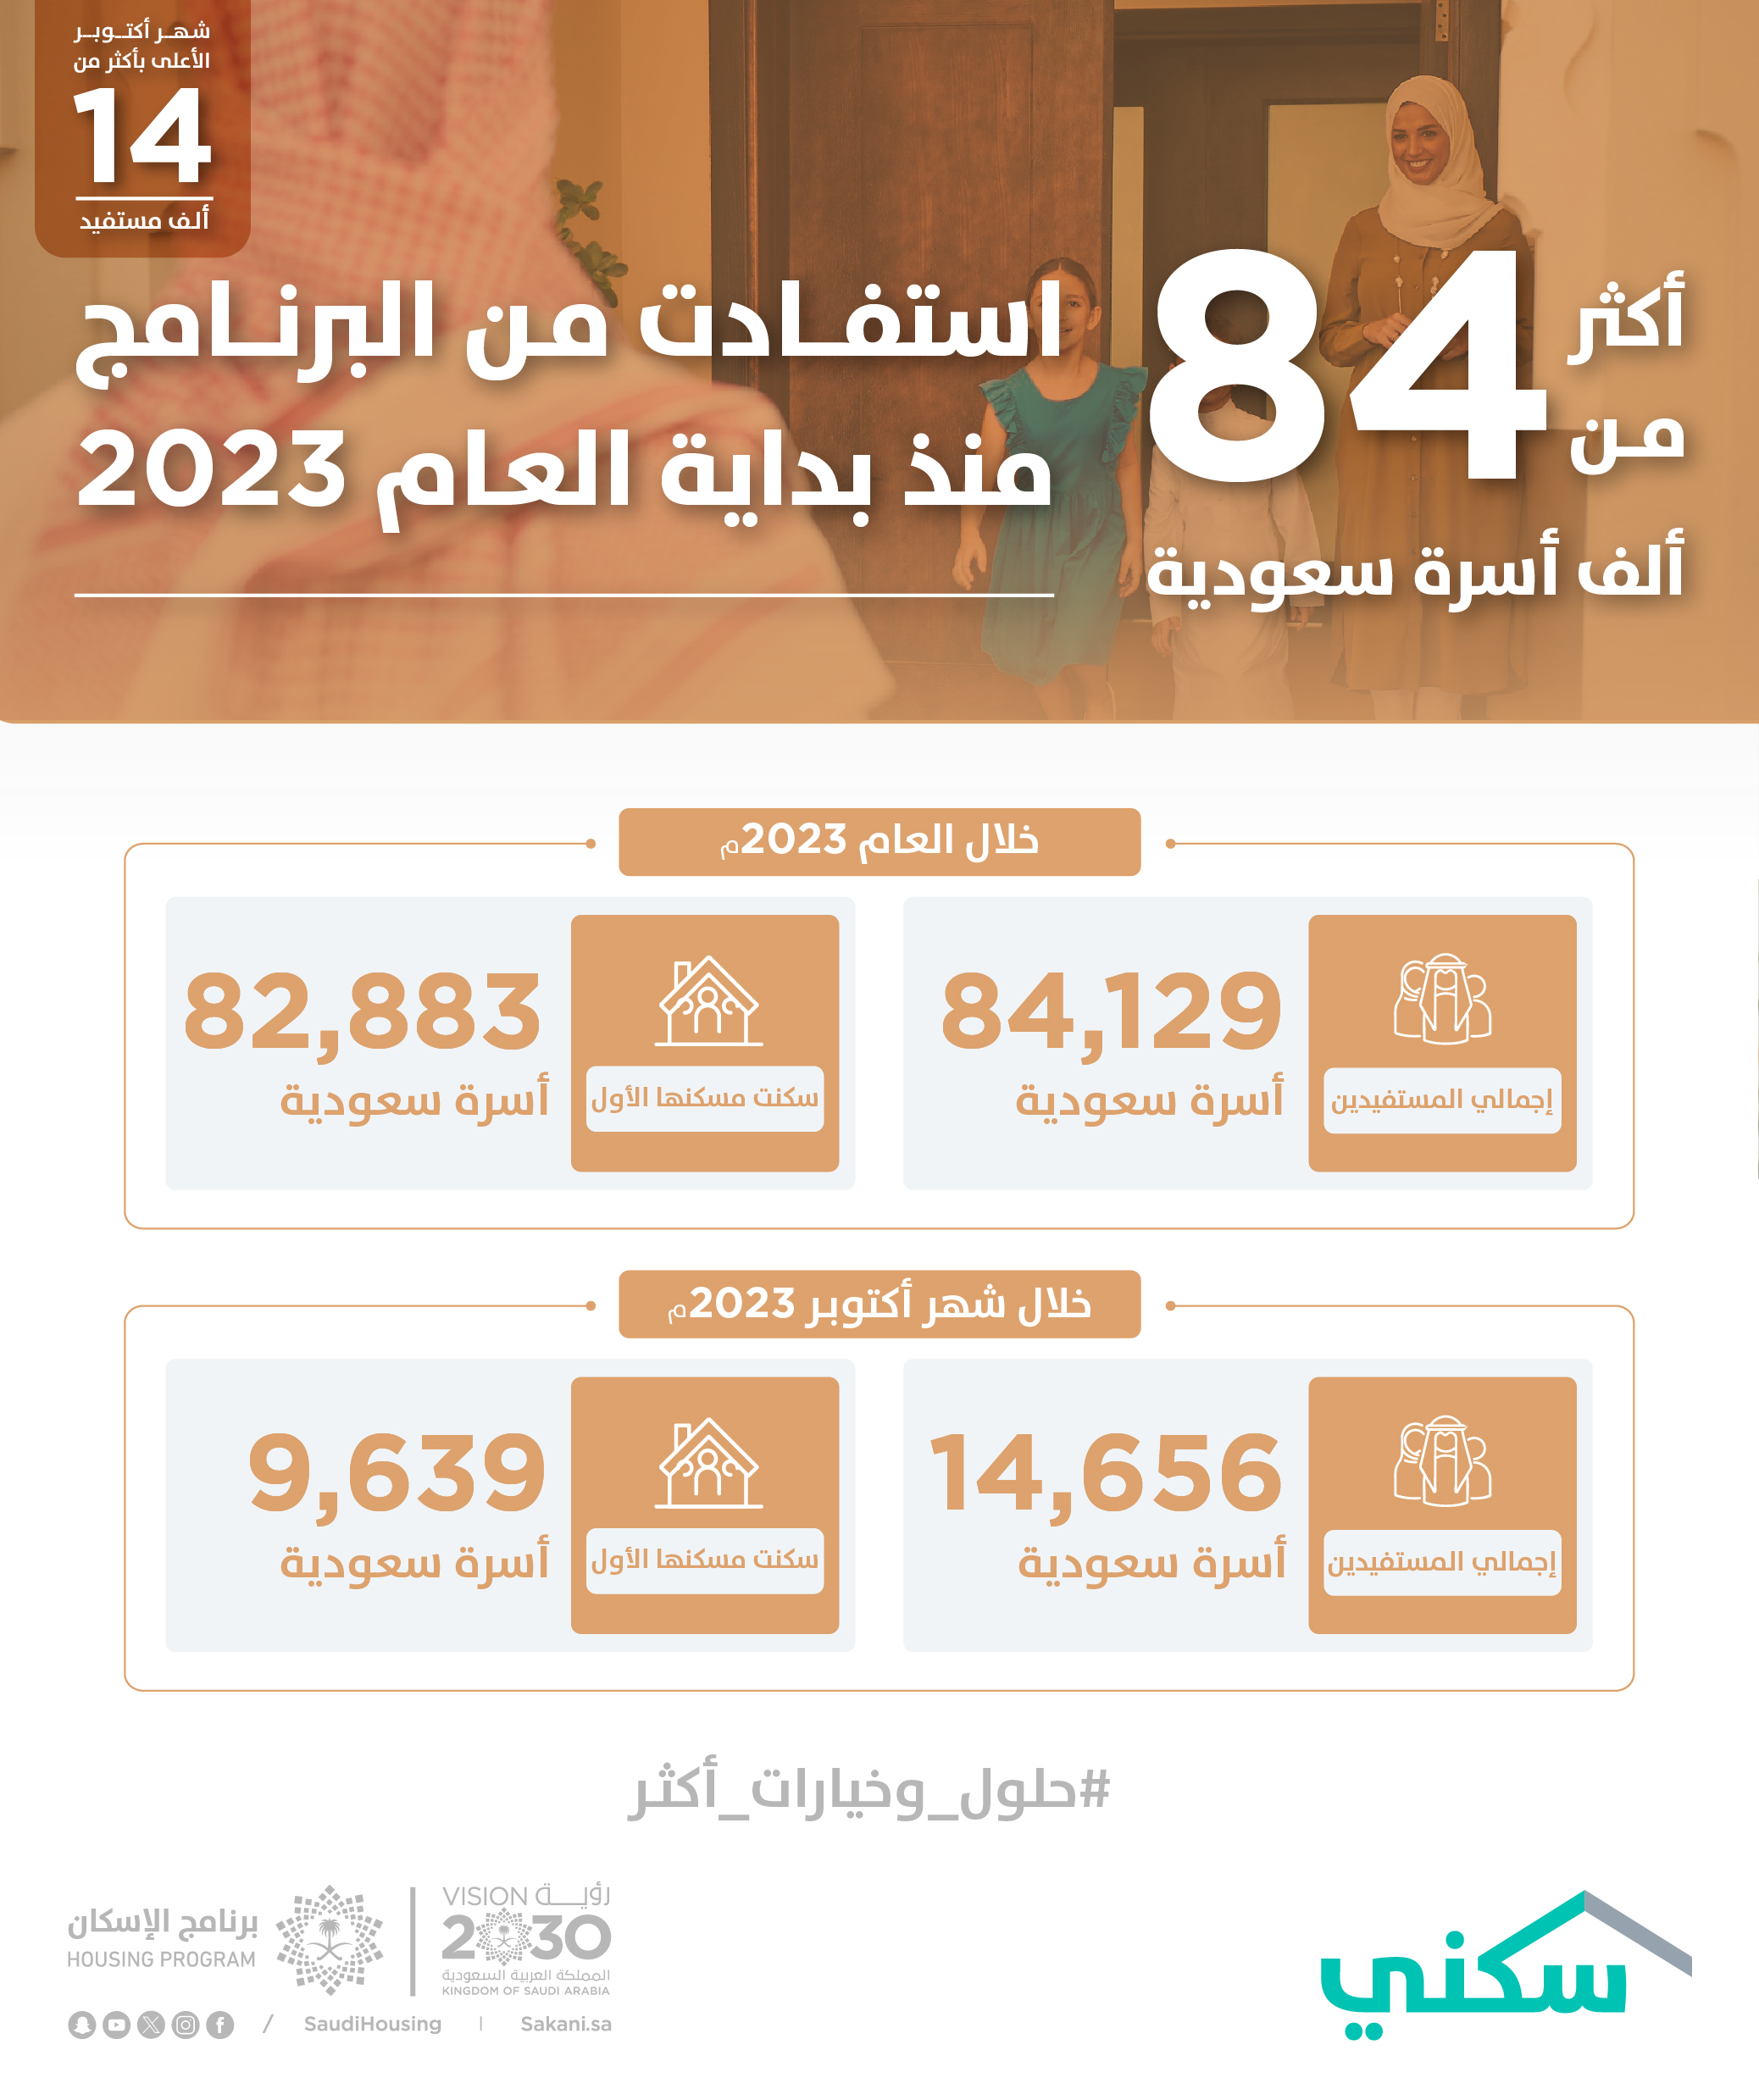 Sakani: 84 thousand Saudi families have benefited from the Program since the beginning of the year, and October is the highest with over 14 thousand beneficiaries